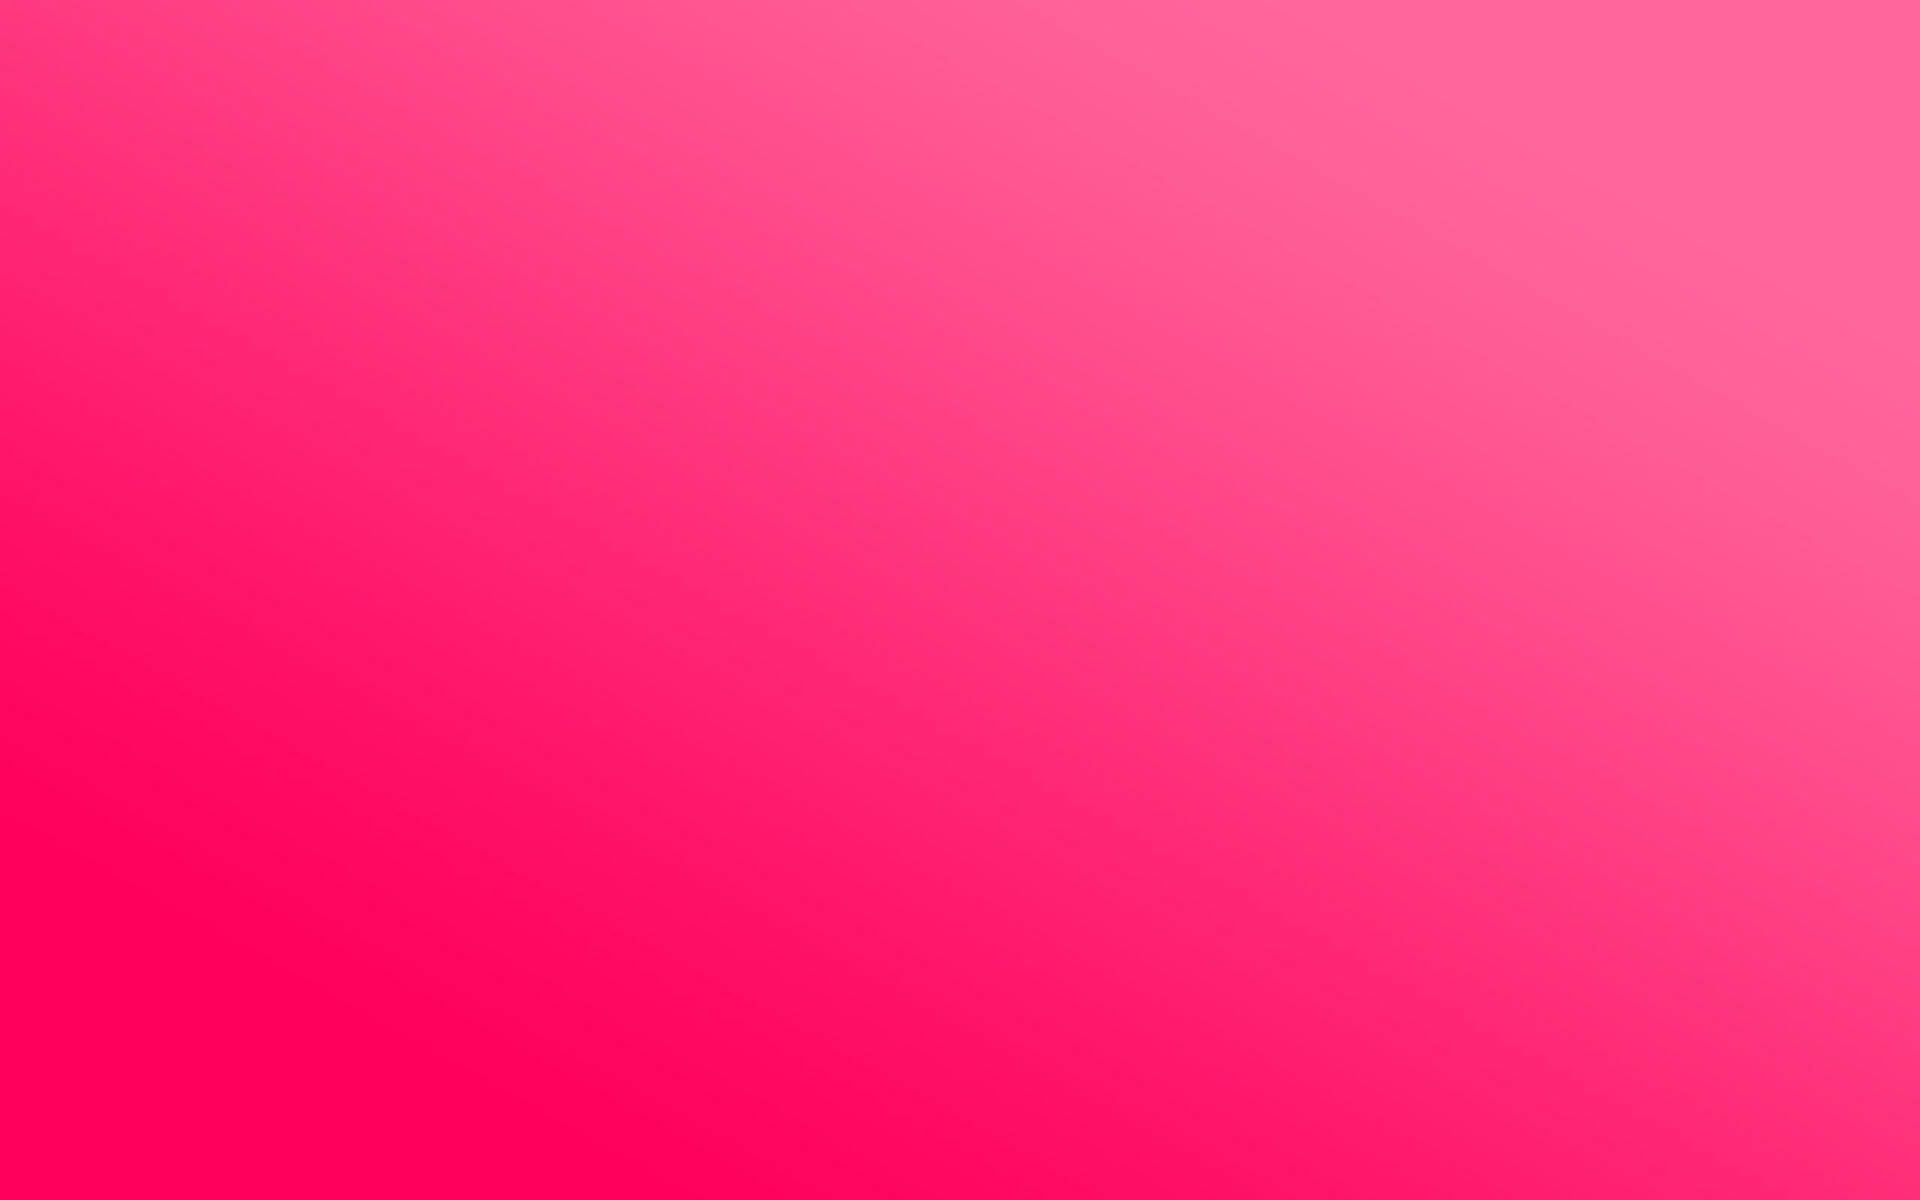 Red And Neon Pink Gradient Picture